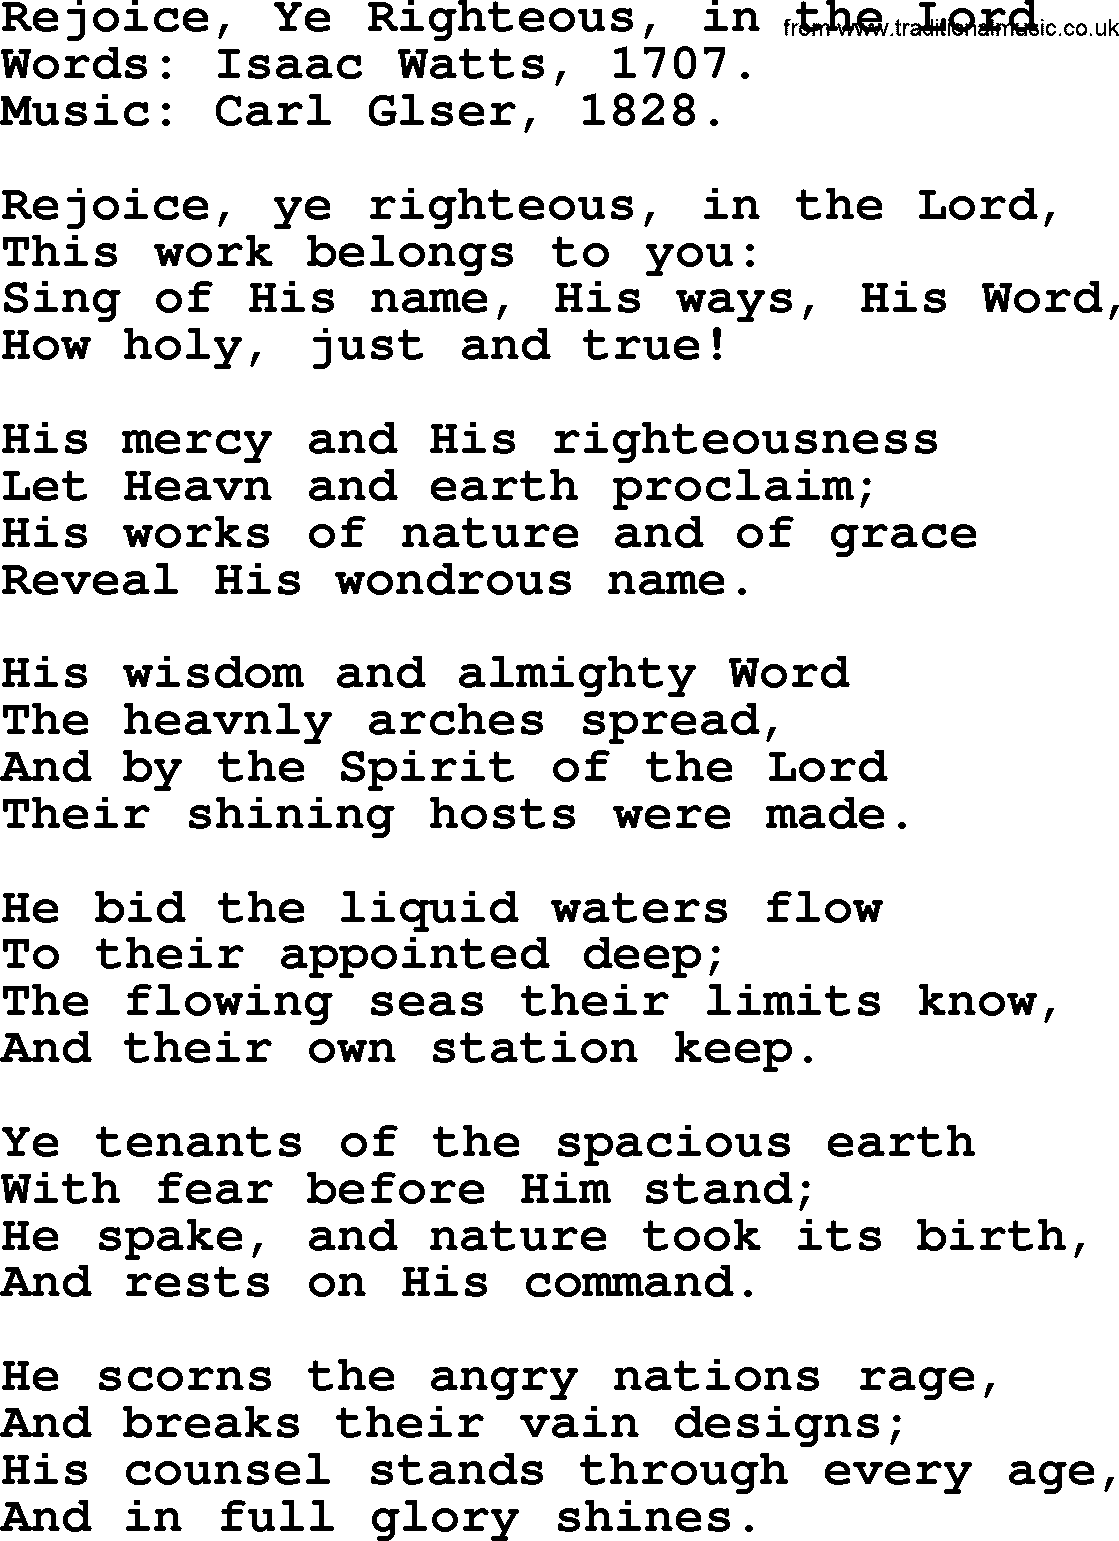 Isaac Watts Christian hymn: Rejoice, Ye Righteous, in the Lord- lyricss